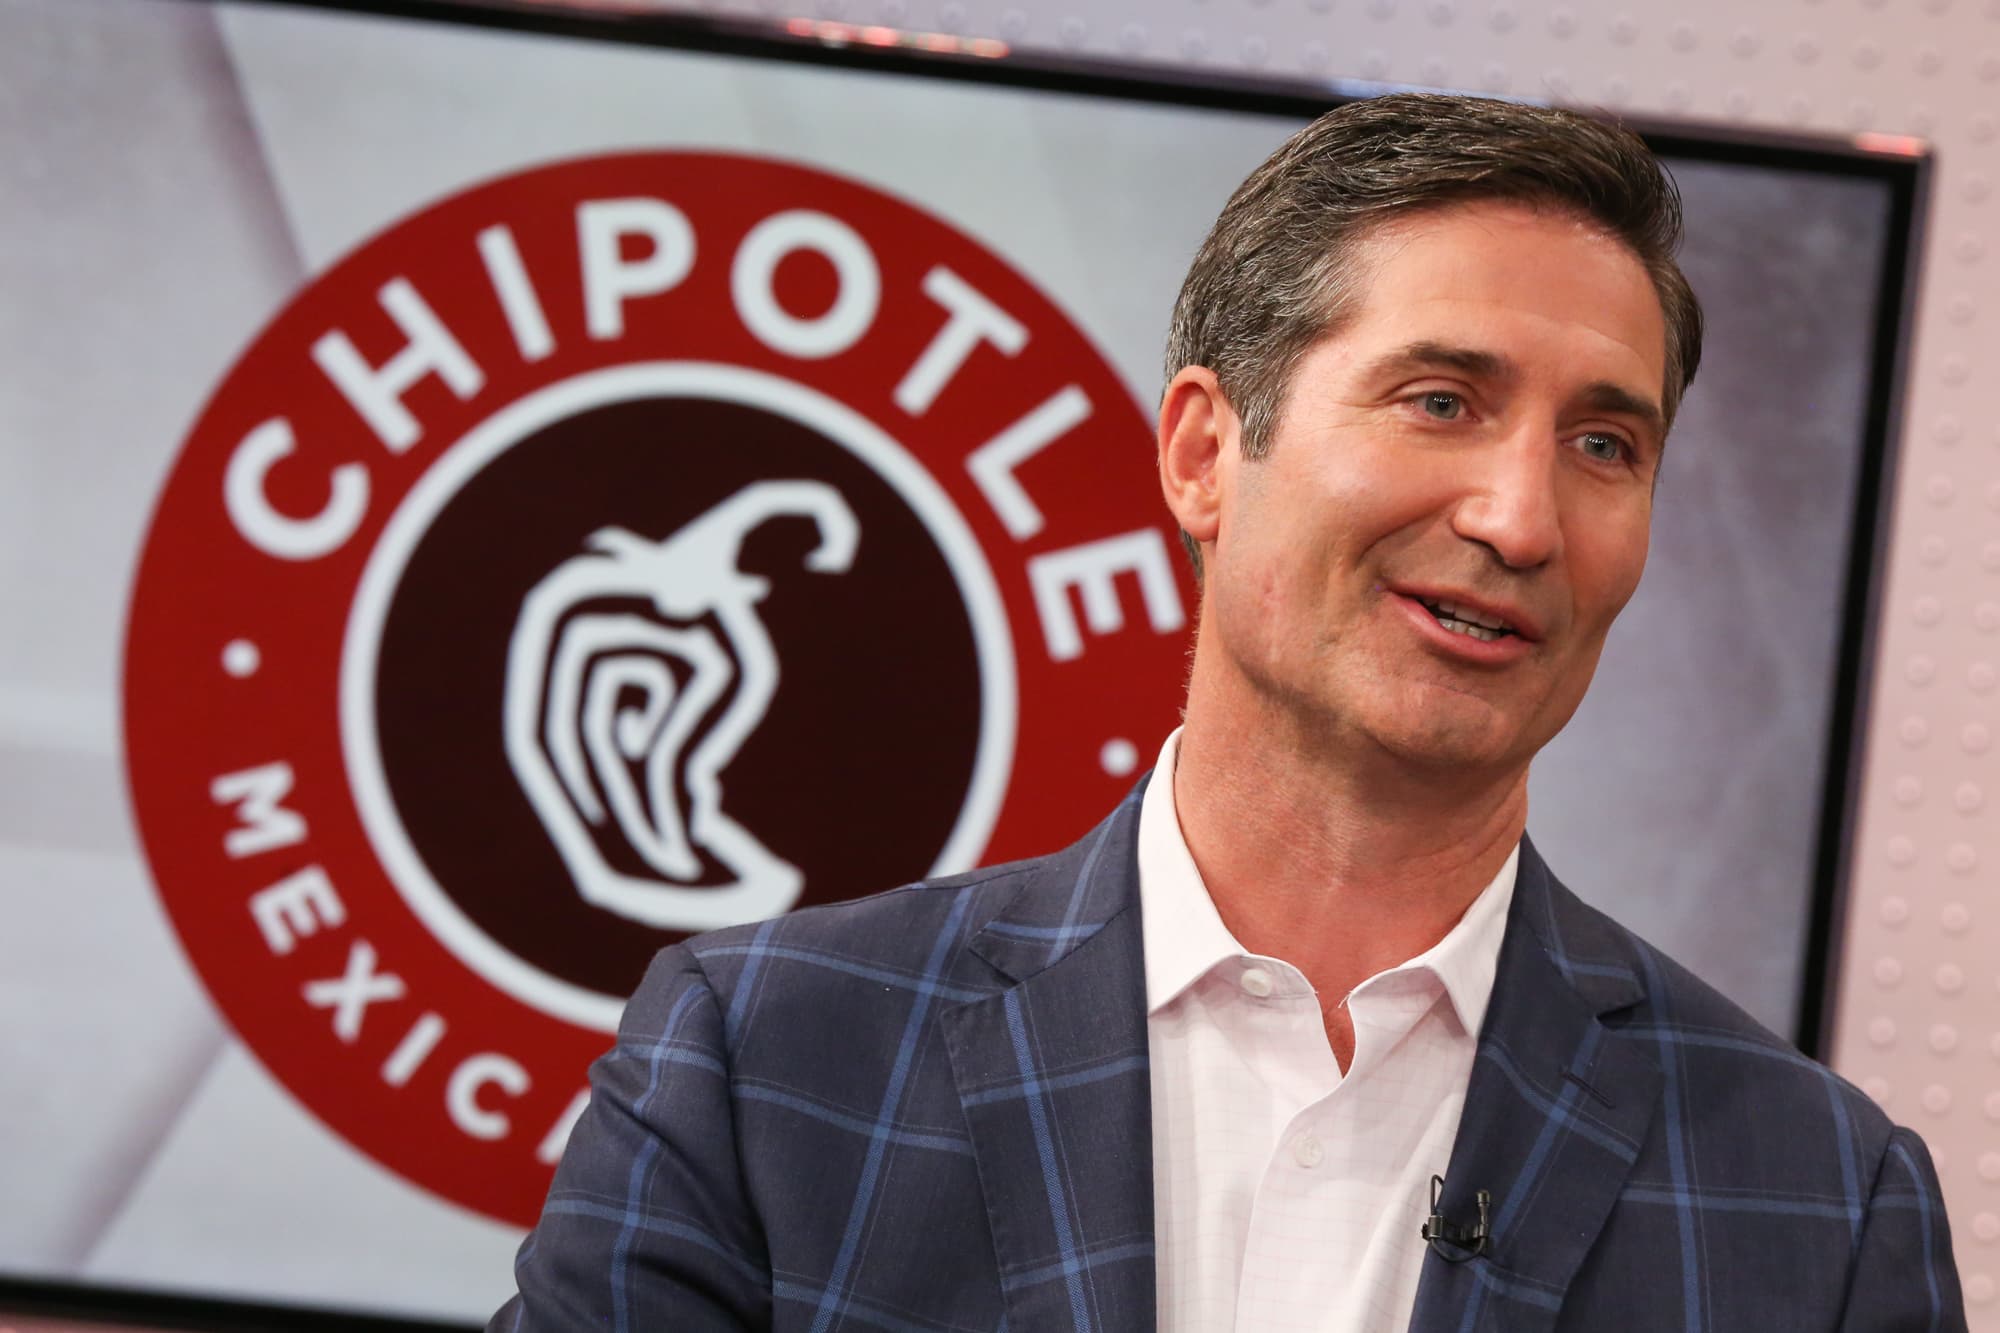 Chipotle will link executive compensation to environmental and diversity goals